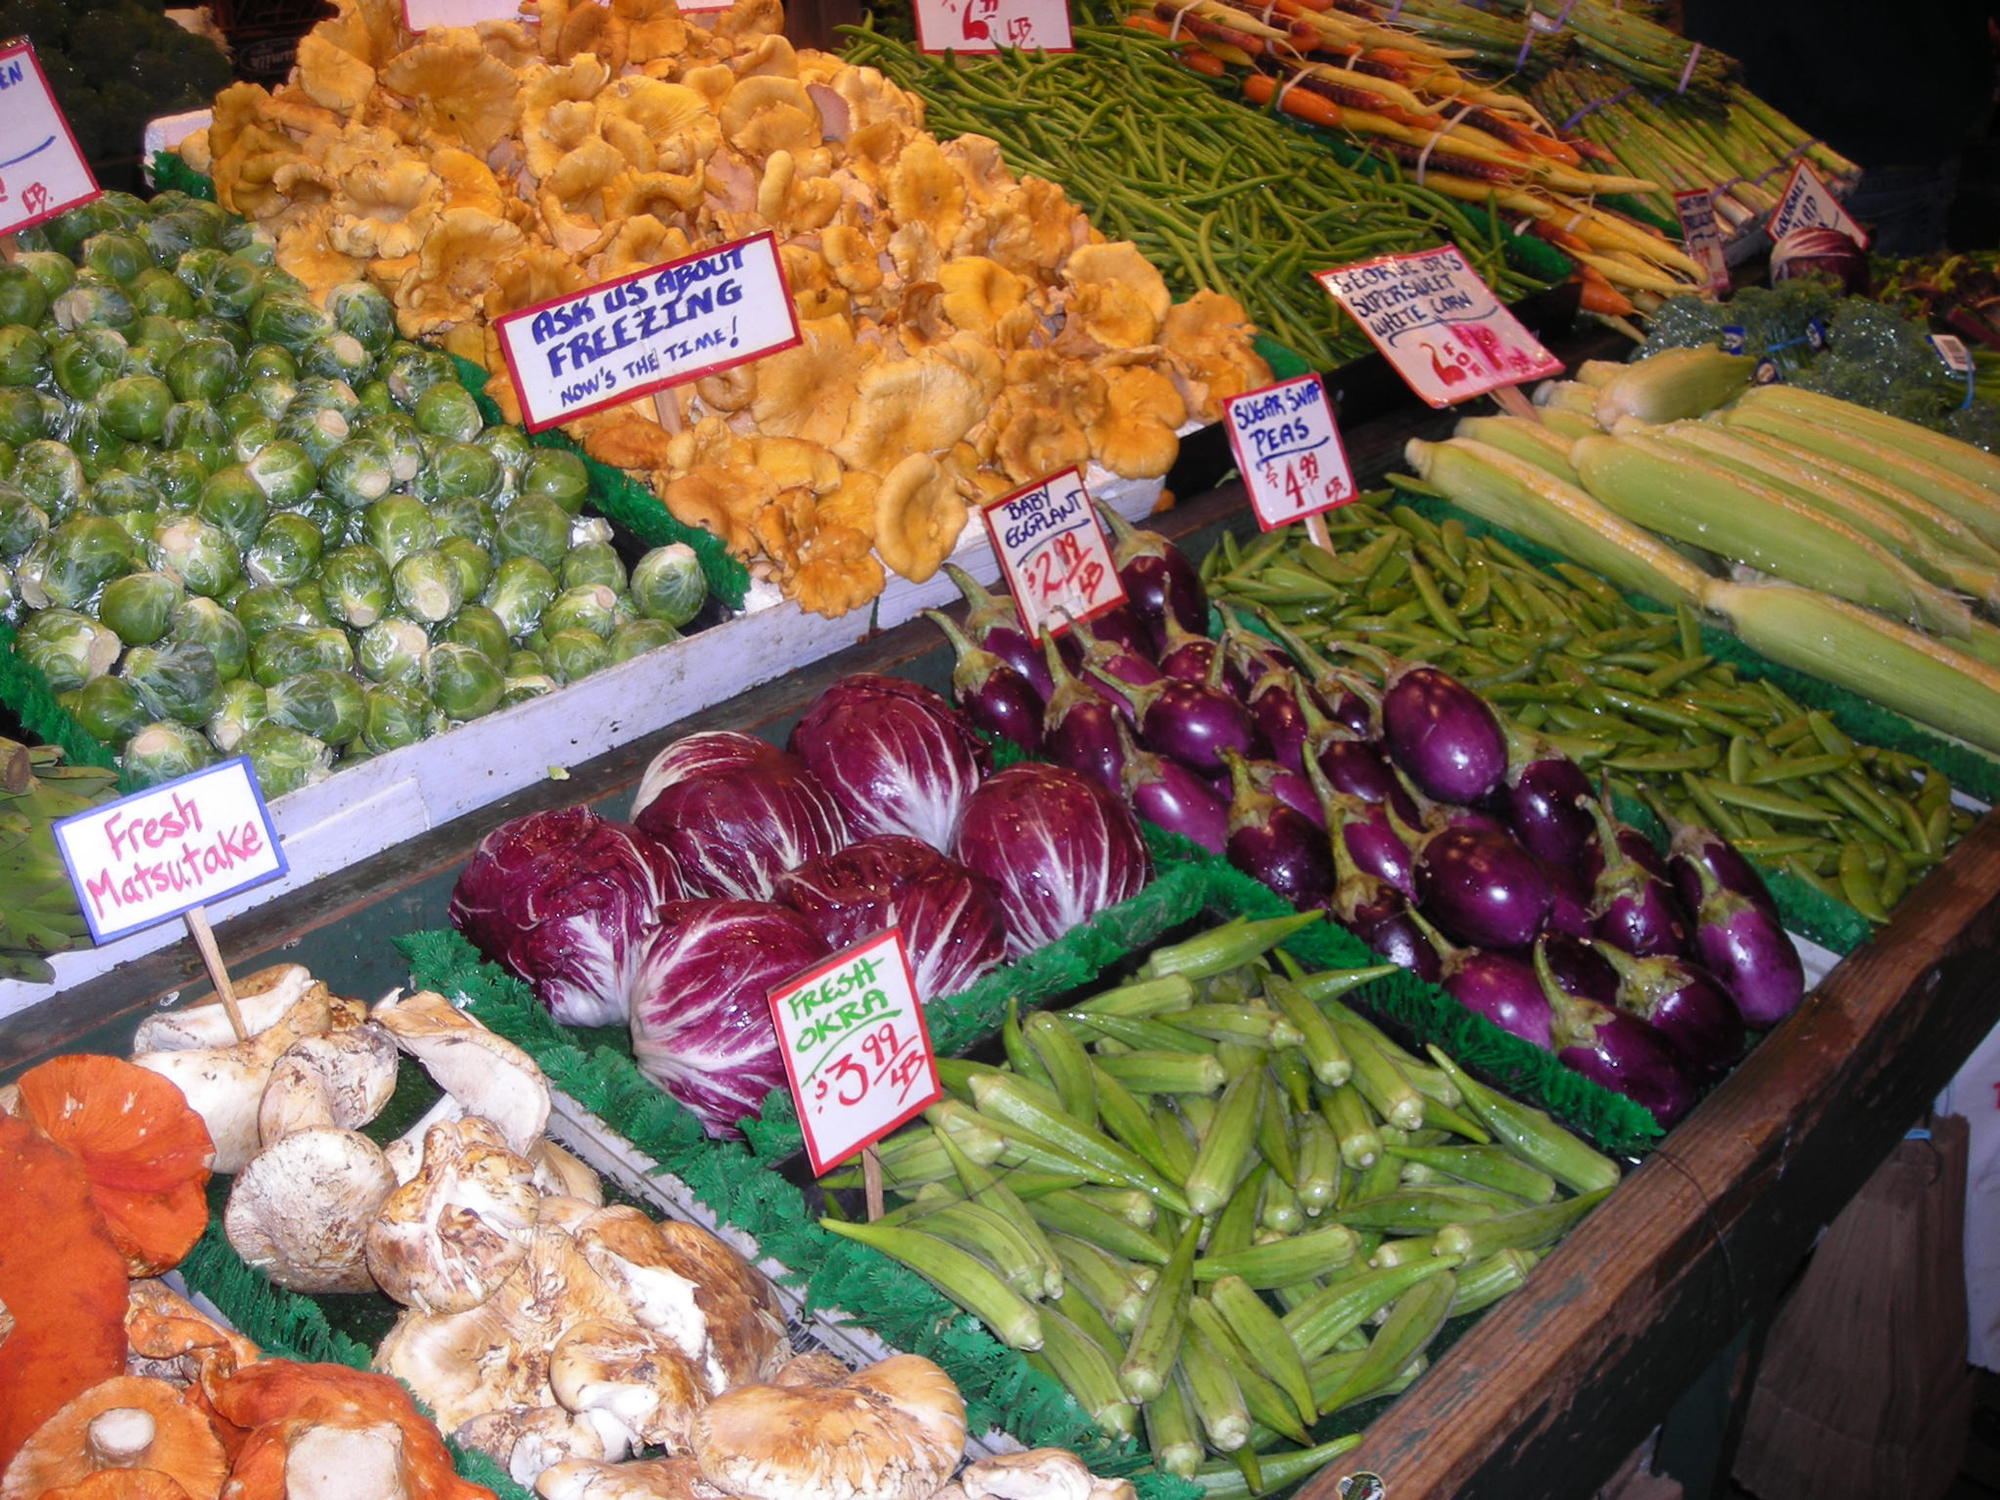 Vegetable market stall at Seattle's Pike Place market